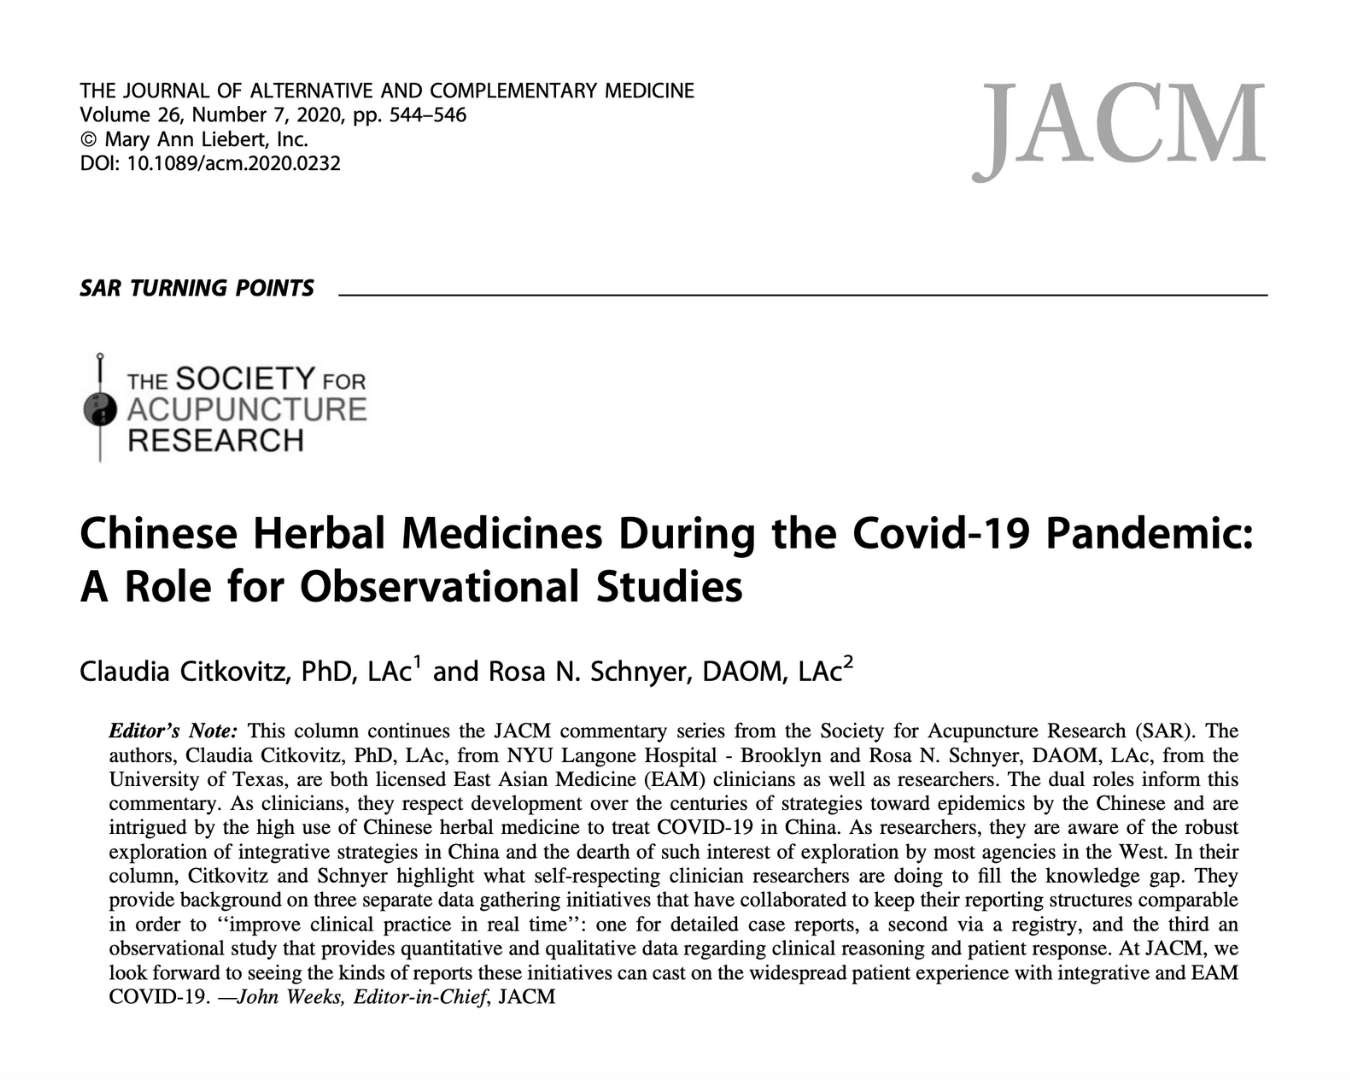 Chinese Herbal Medicines During the Covid-19 Pandemic: A Role for Observational Studies